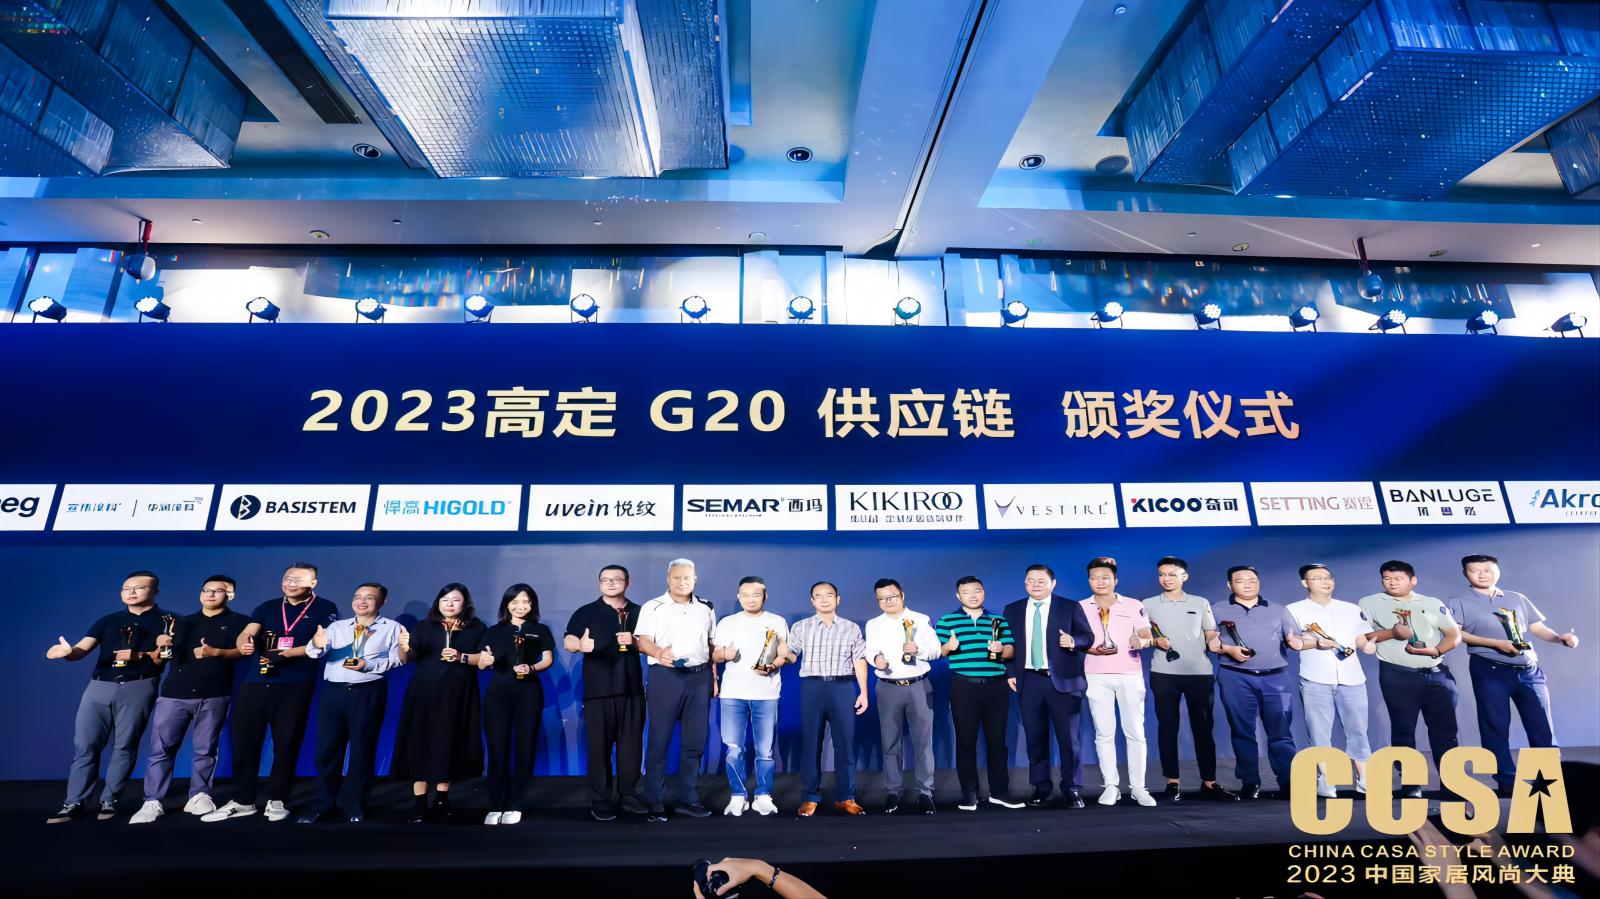 Shanghai Setting has been awarded the "2023 High Definition G20 Supply Chain" for the year 2023 in a row